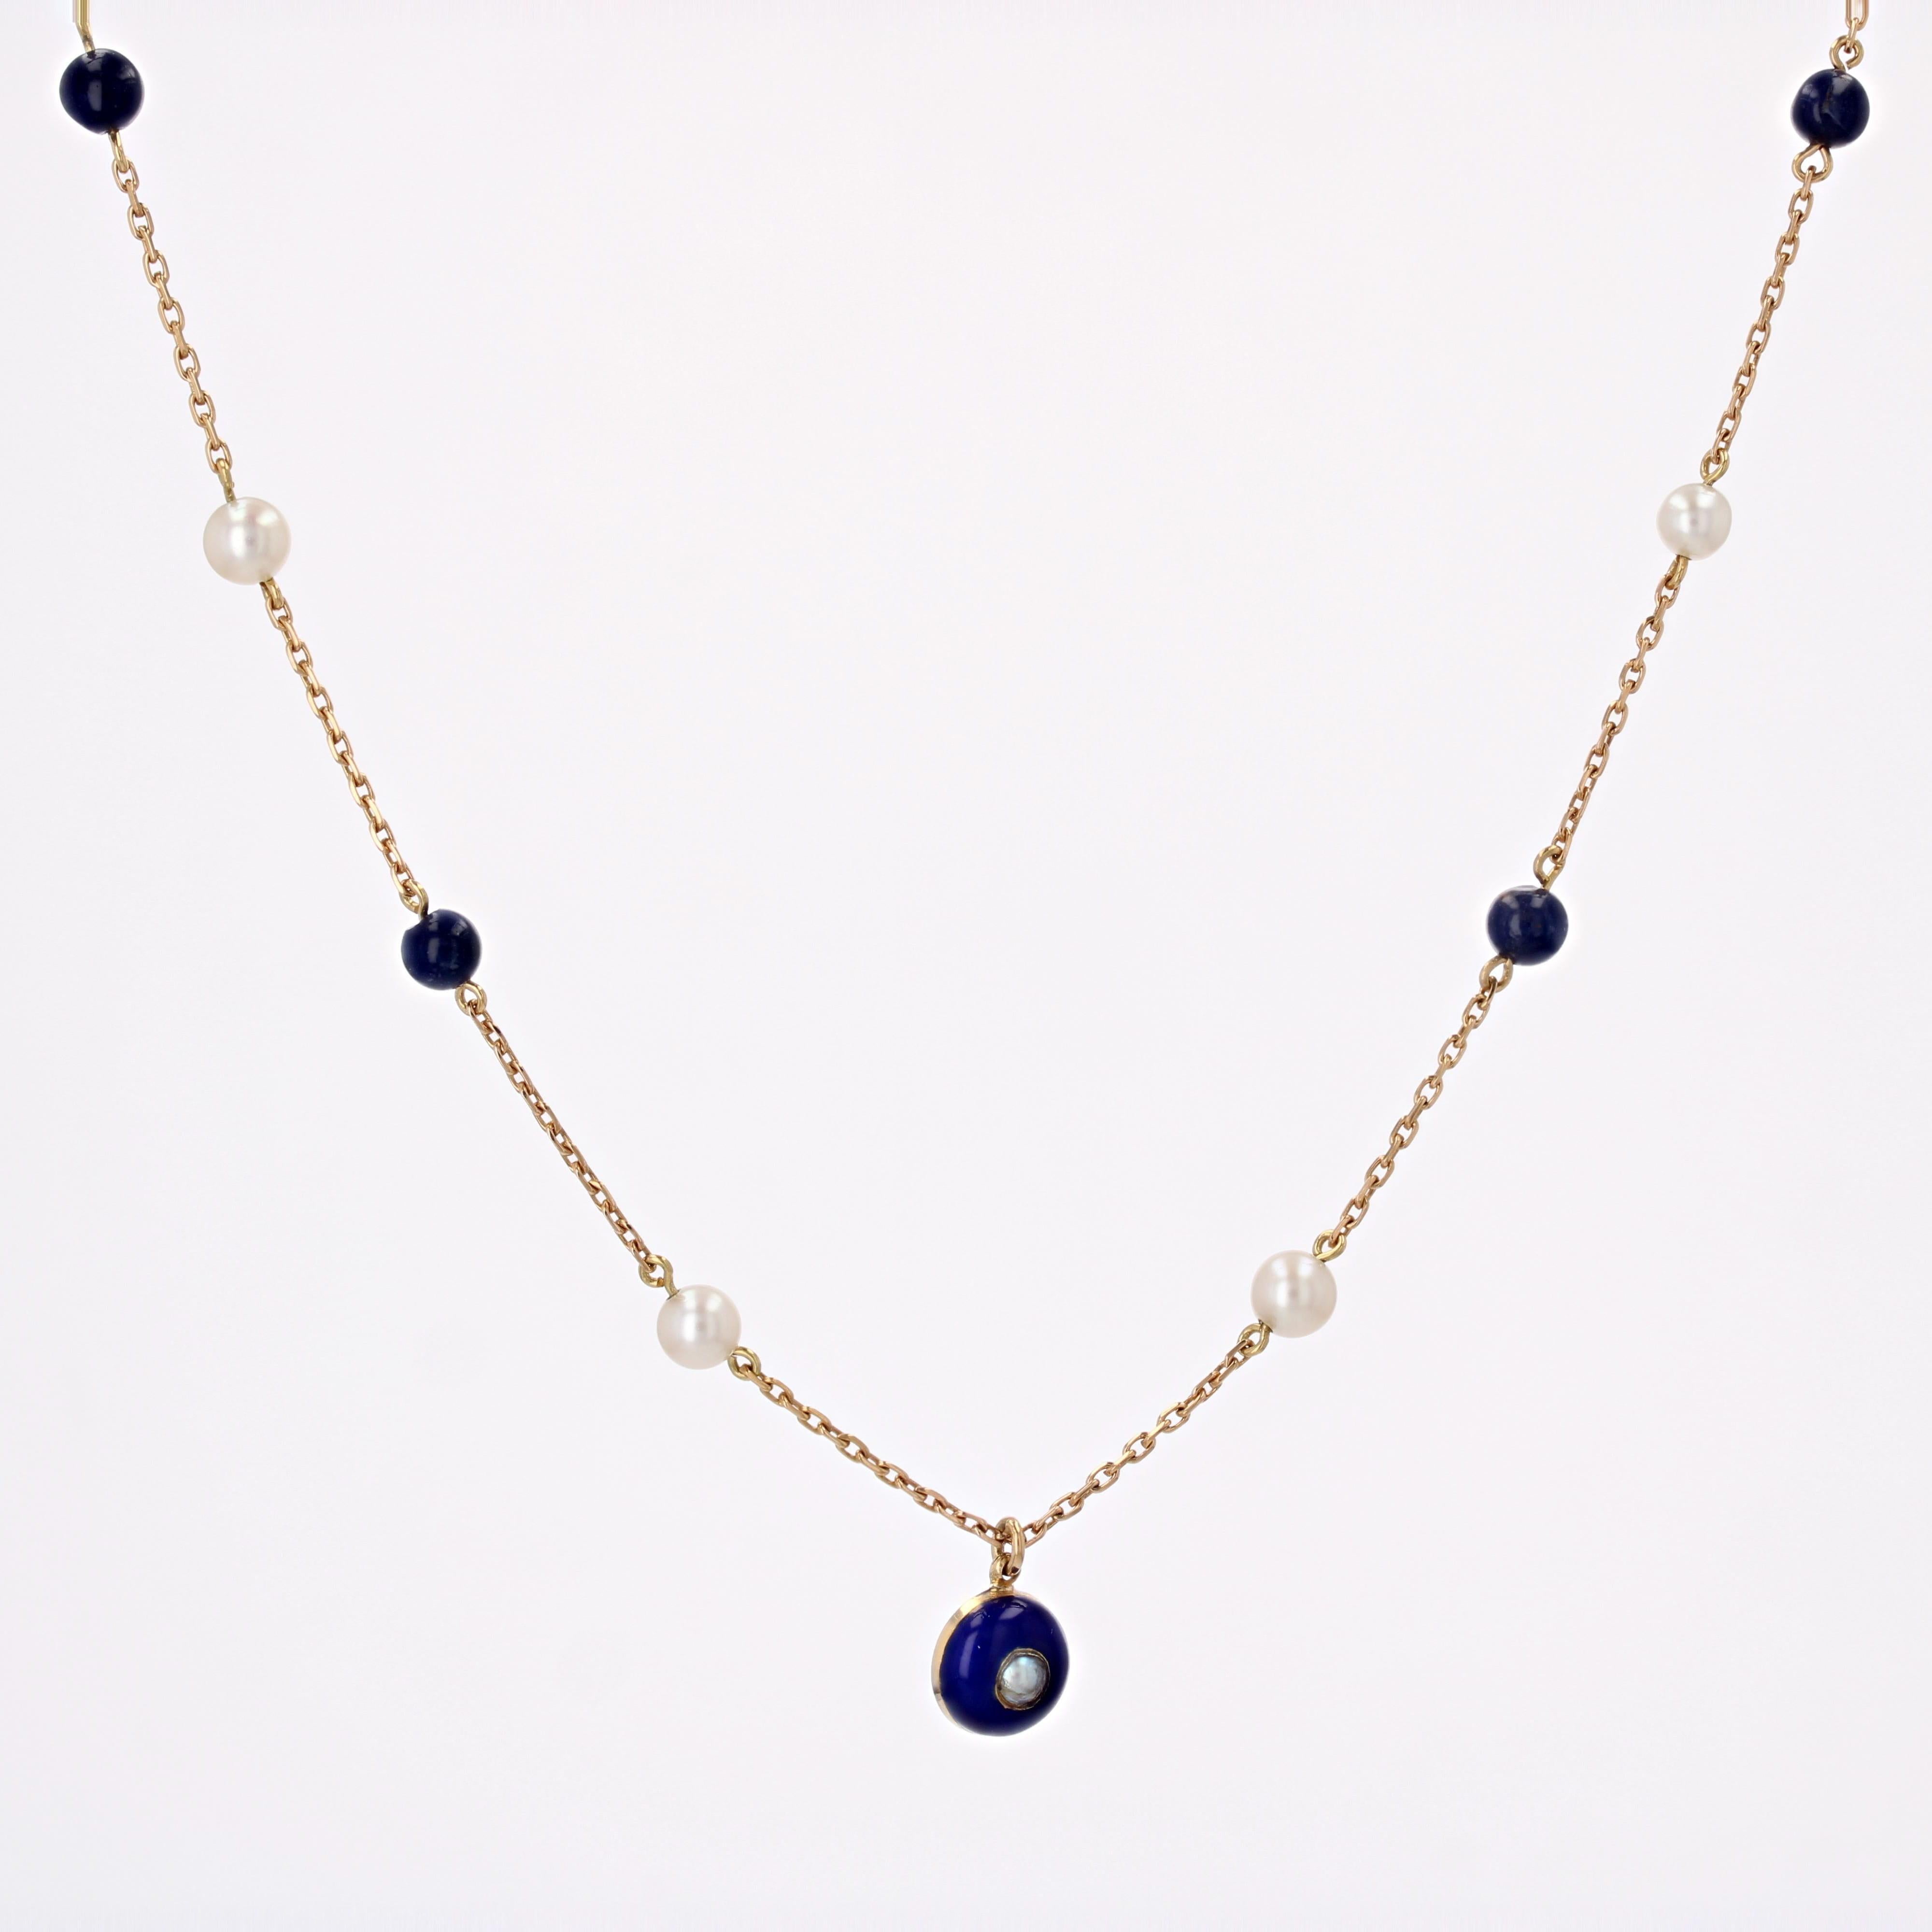 Creation Baume - Unique piece.

Necklace in 18 carat yellow gold, eagle head hallmark. 

It is decorated on the front with 4 beads of lapiz lazuli and 4 cultured pearls of alternate. The central motif is a half-sphere in blue enamel set with a fine